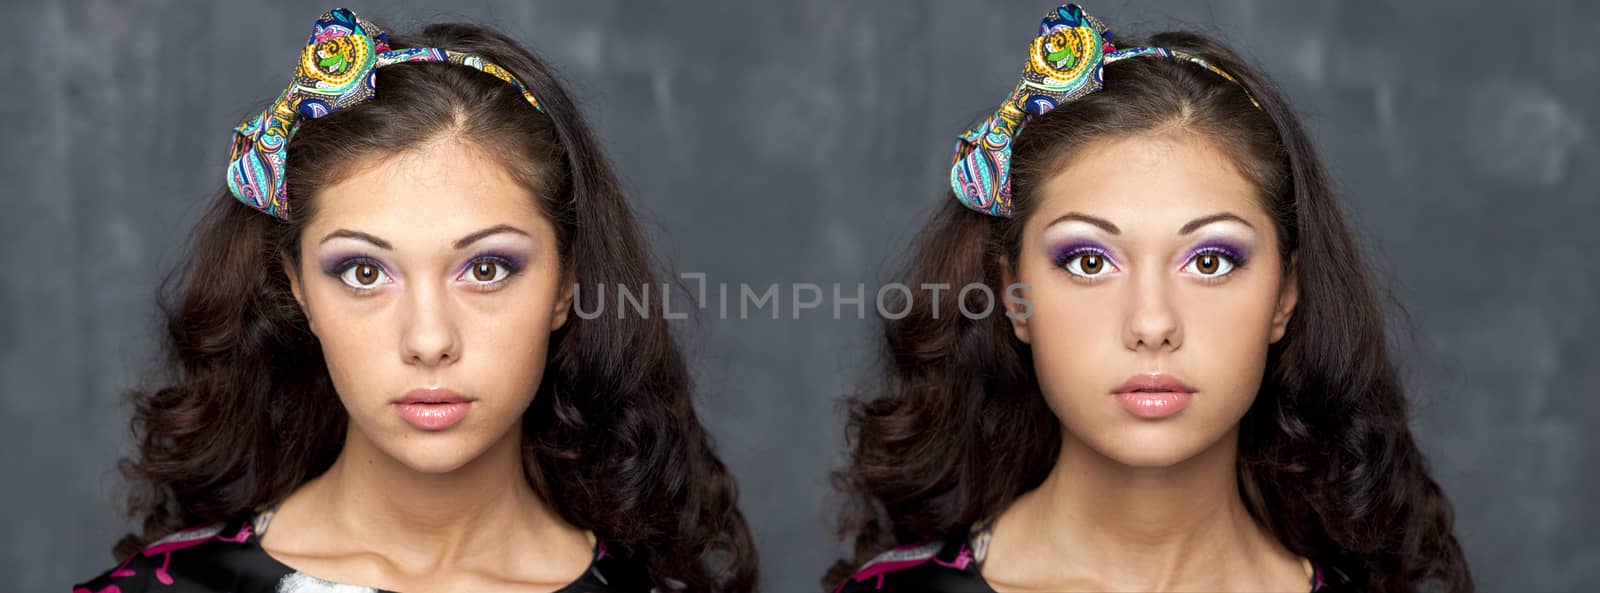 Before and after the retouch